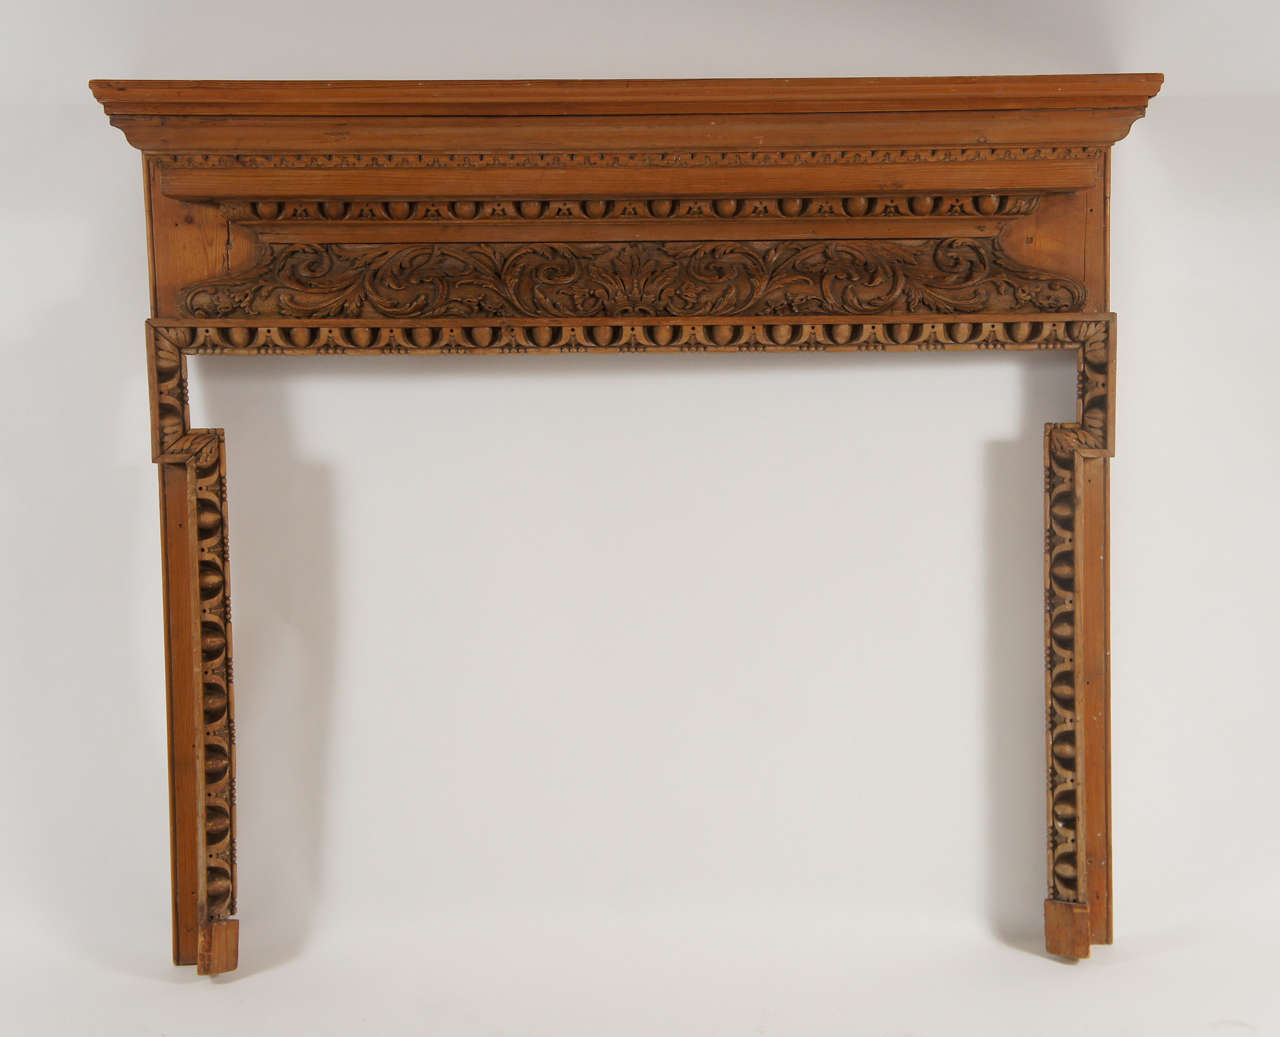 Beautiful late George II, early George III carved pine and lime wood fireplace mantel having Rococo foliate carved lintel with egg-and-dart under shelf and around opening.  Opening measures 45.88